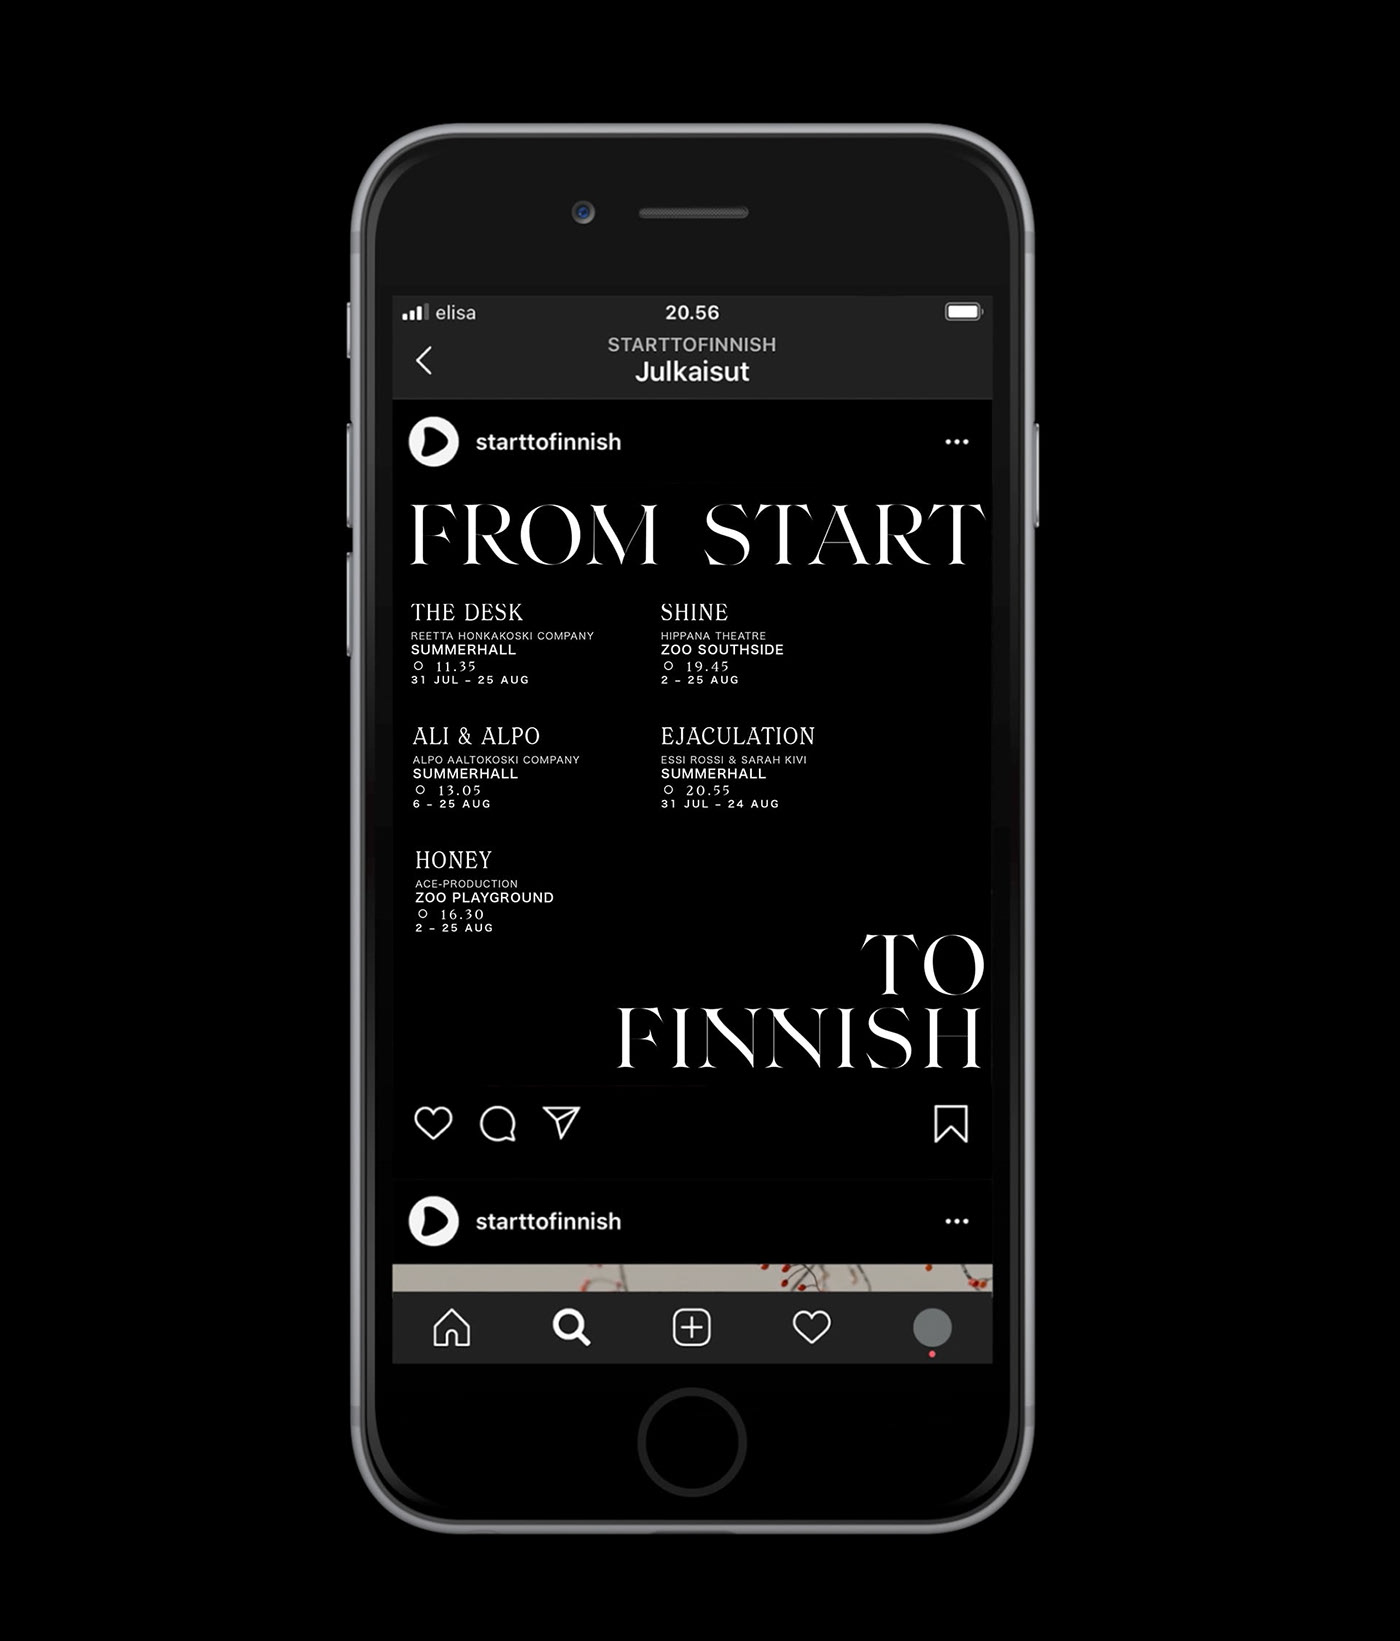 From Start to Finnish on Behance4a0dc091443177.5e31d12c1eed0.jpg